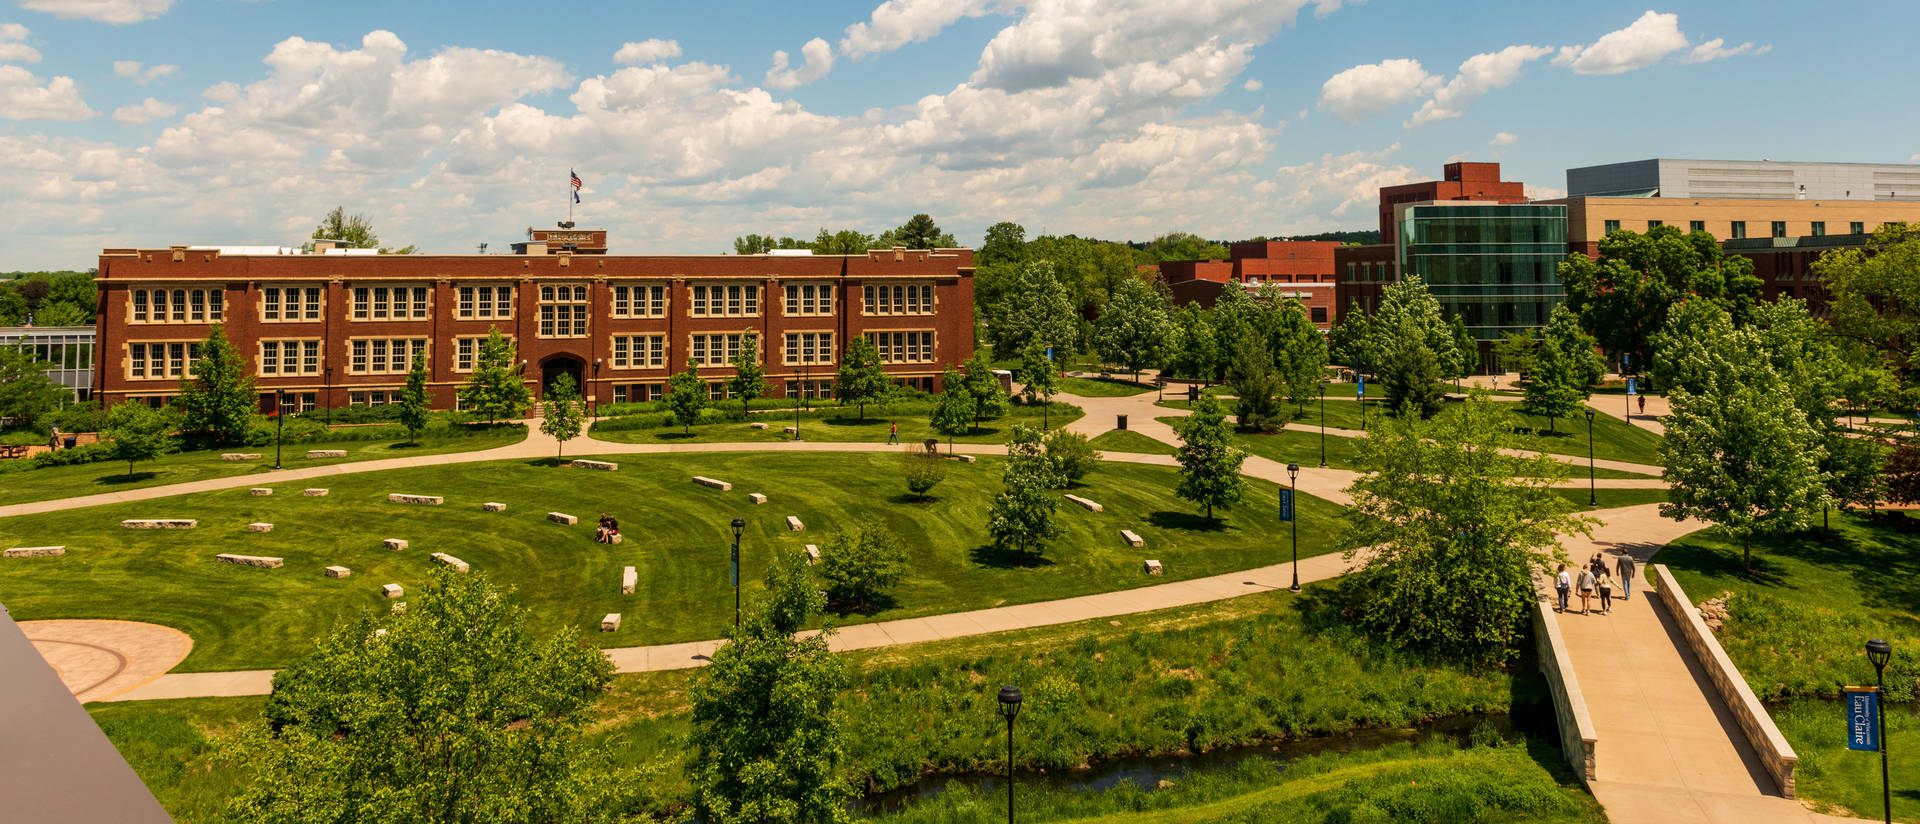 A view of Schofield Hall on a sunny day on campus.